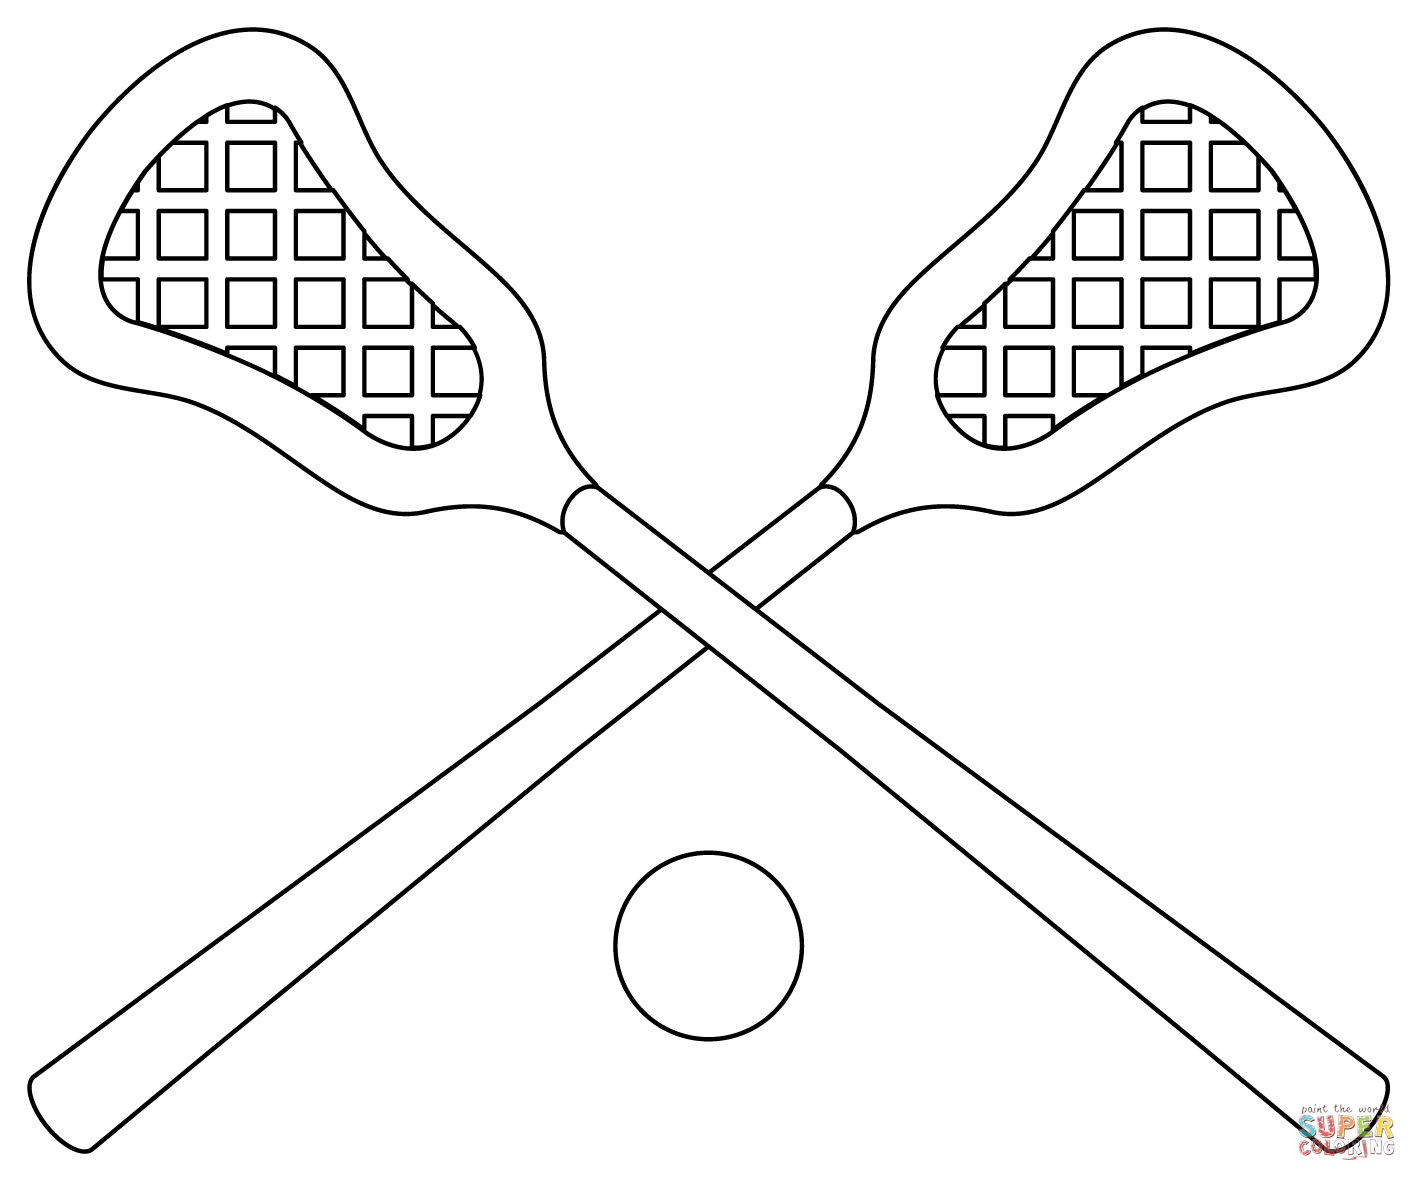 Lacrosse stick coloring page free printable coloring pages